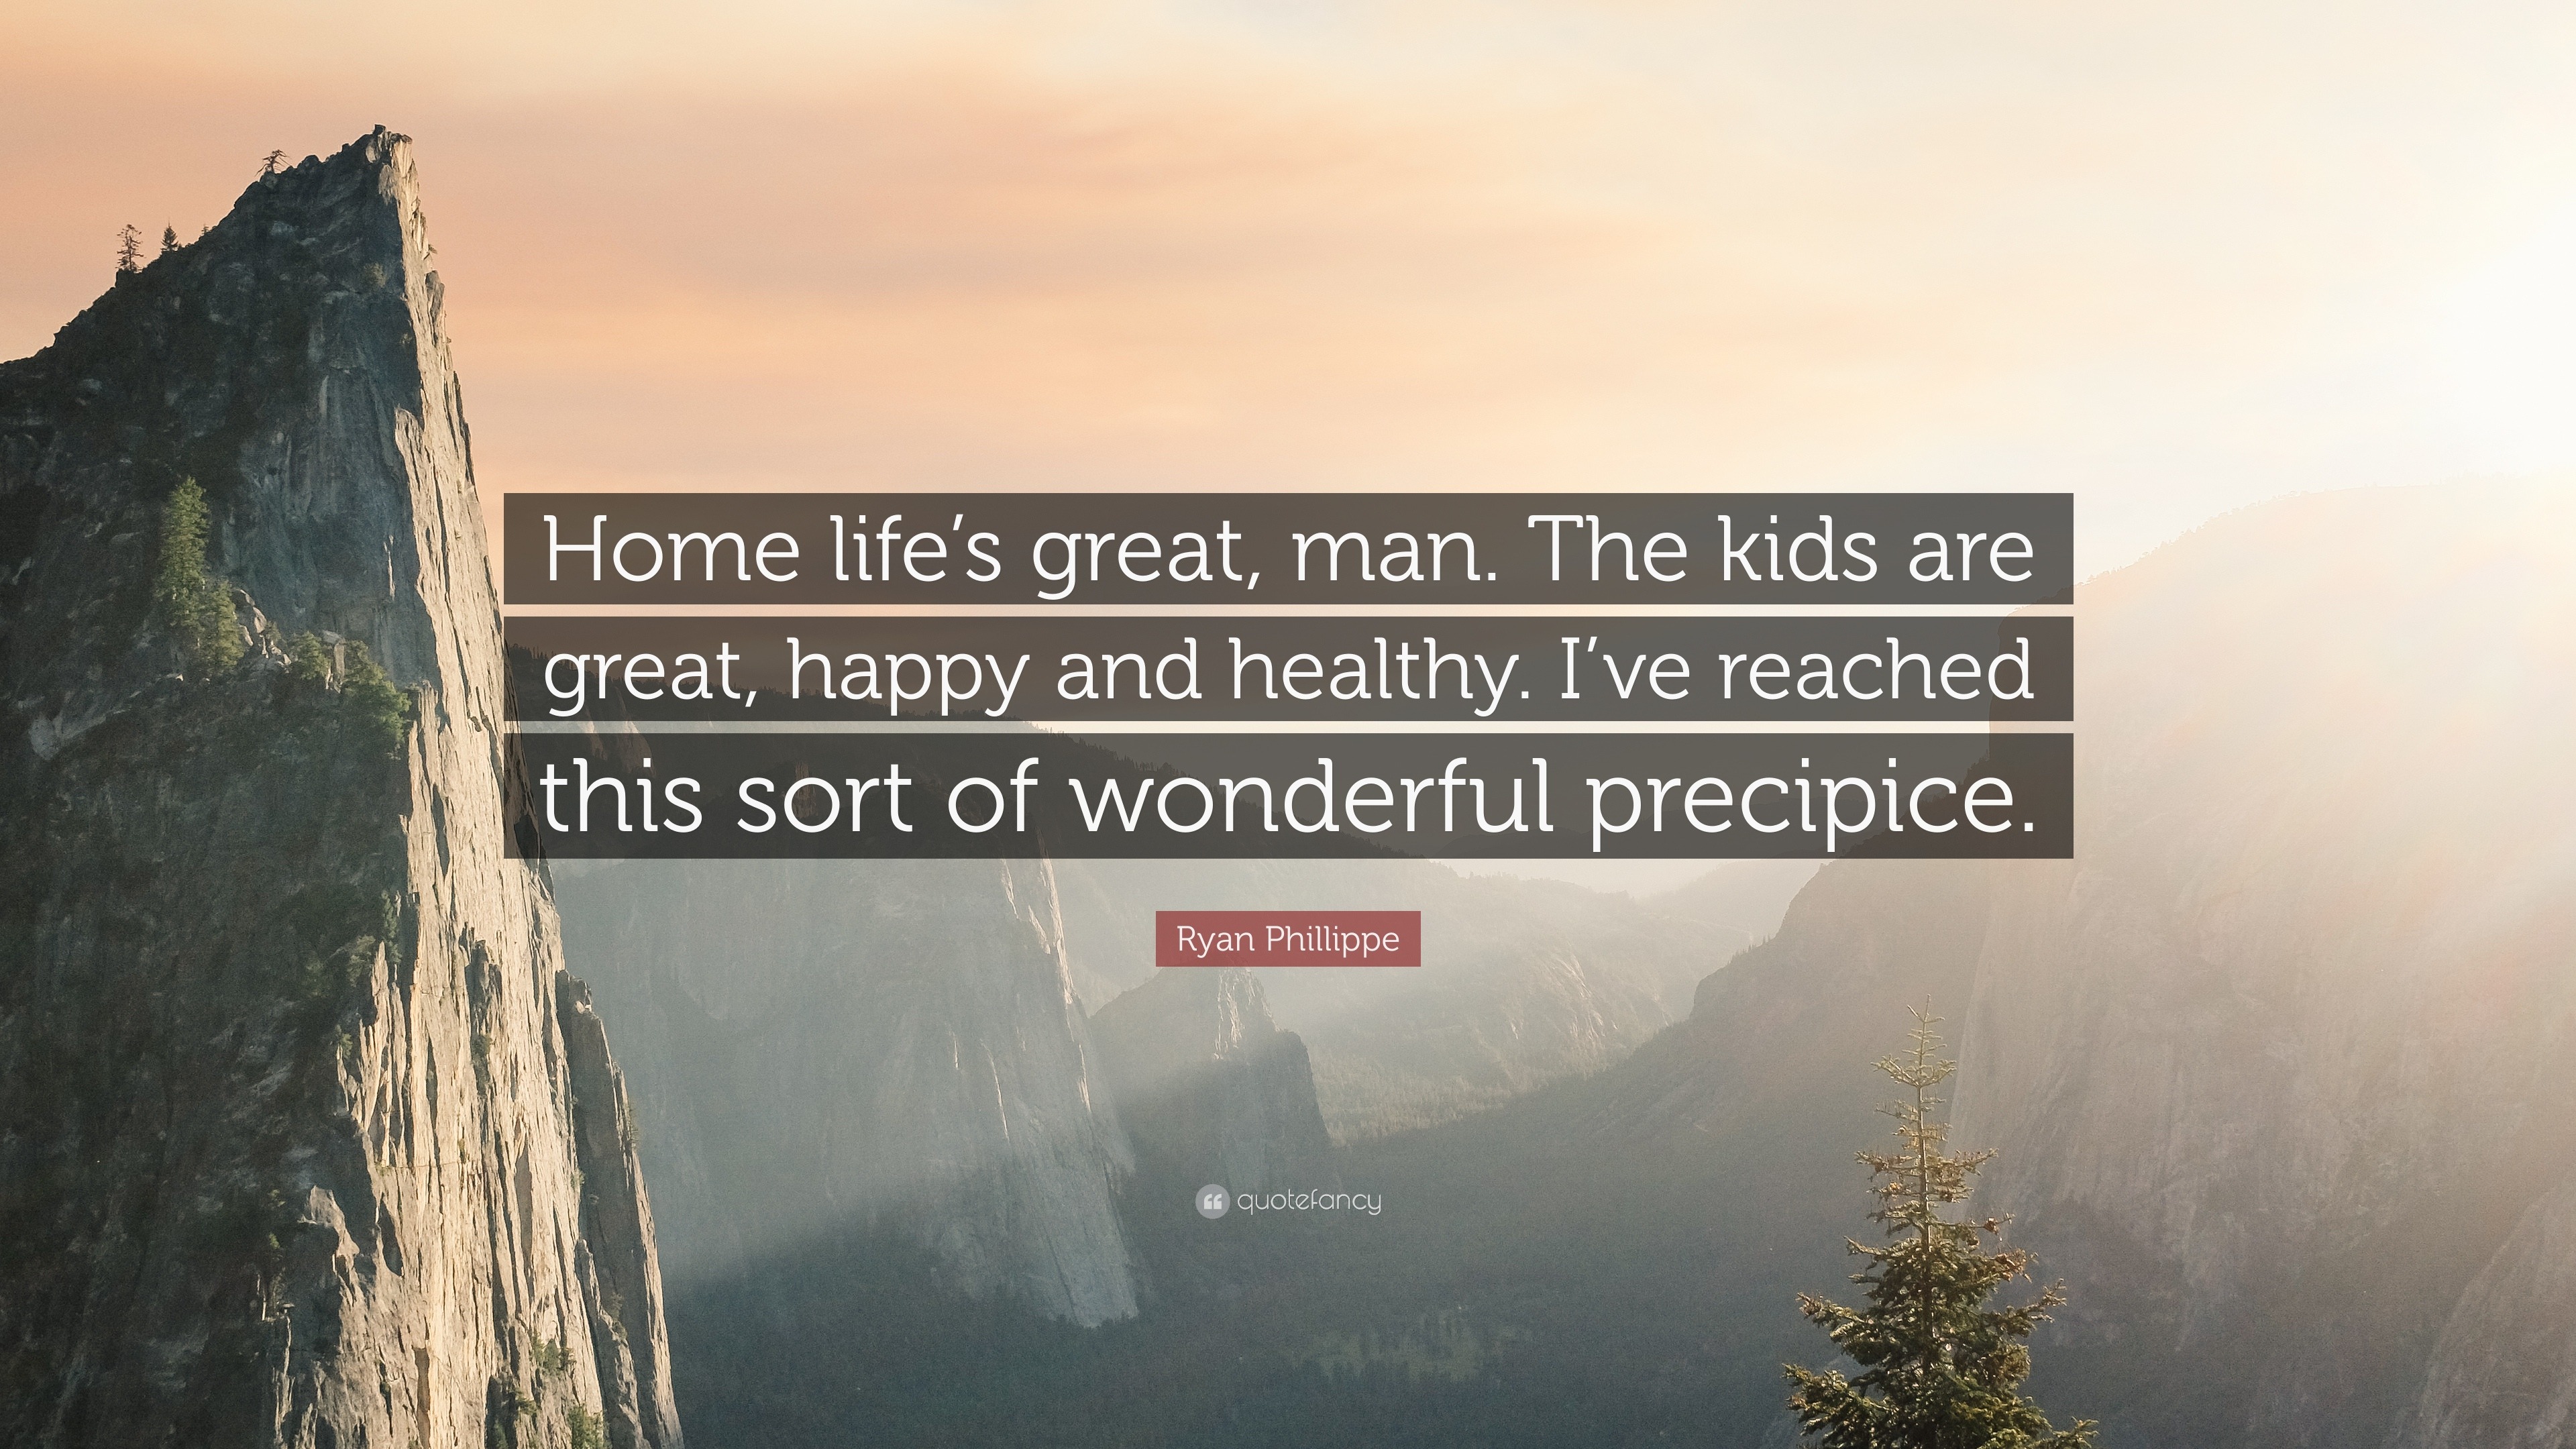 Ryan Phillippe Quote: “Home life's great, man. The kids are great, happy  and healthy. I've